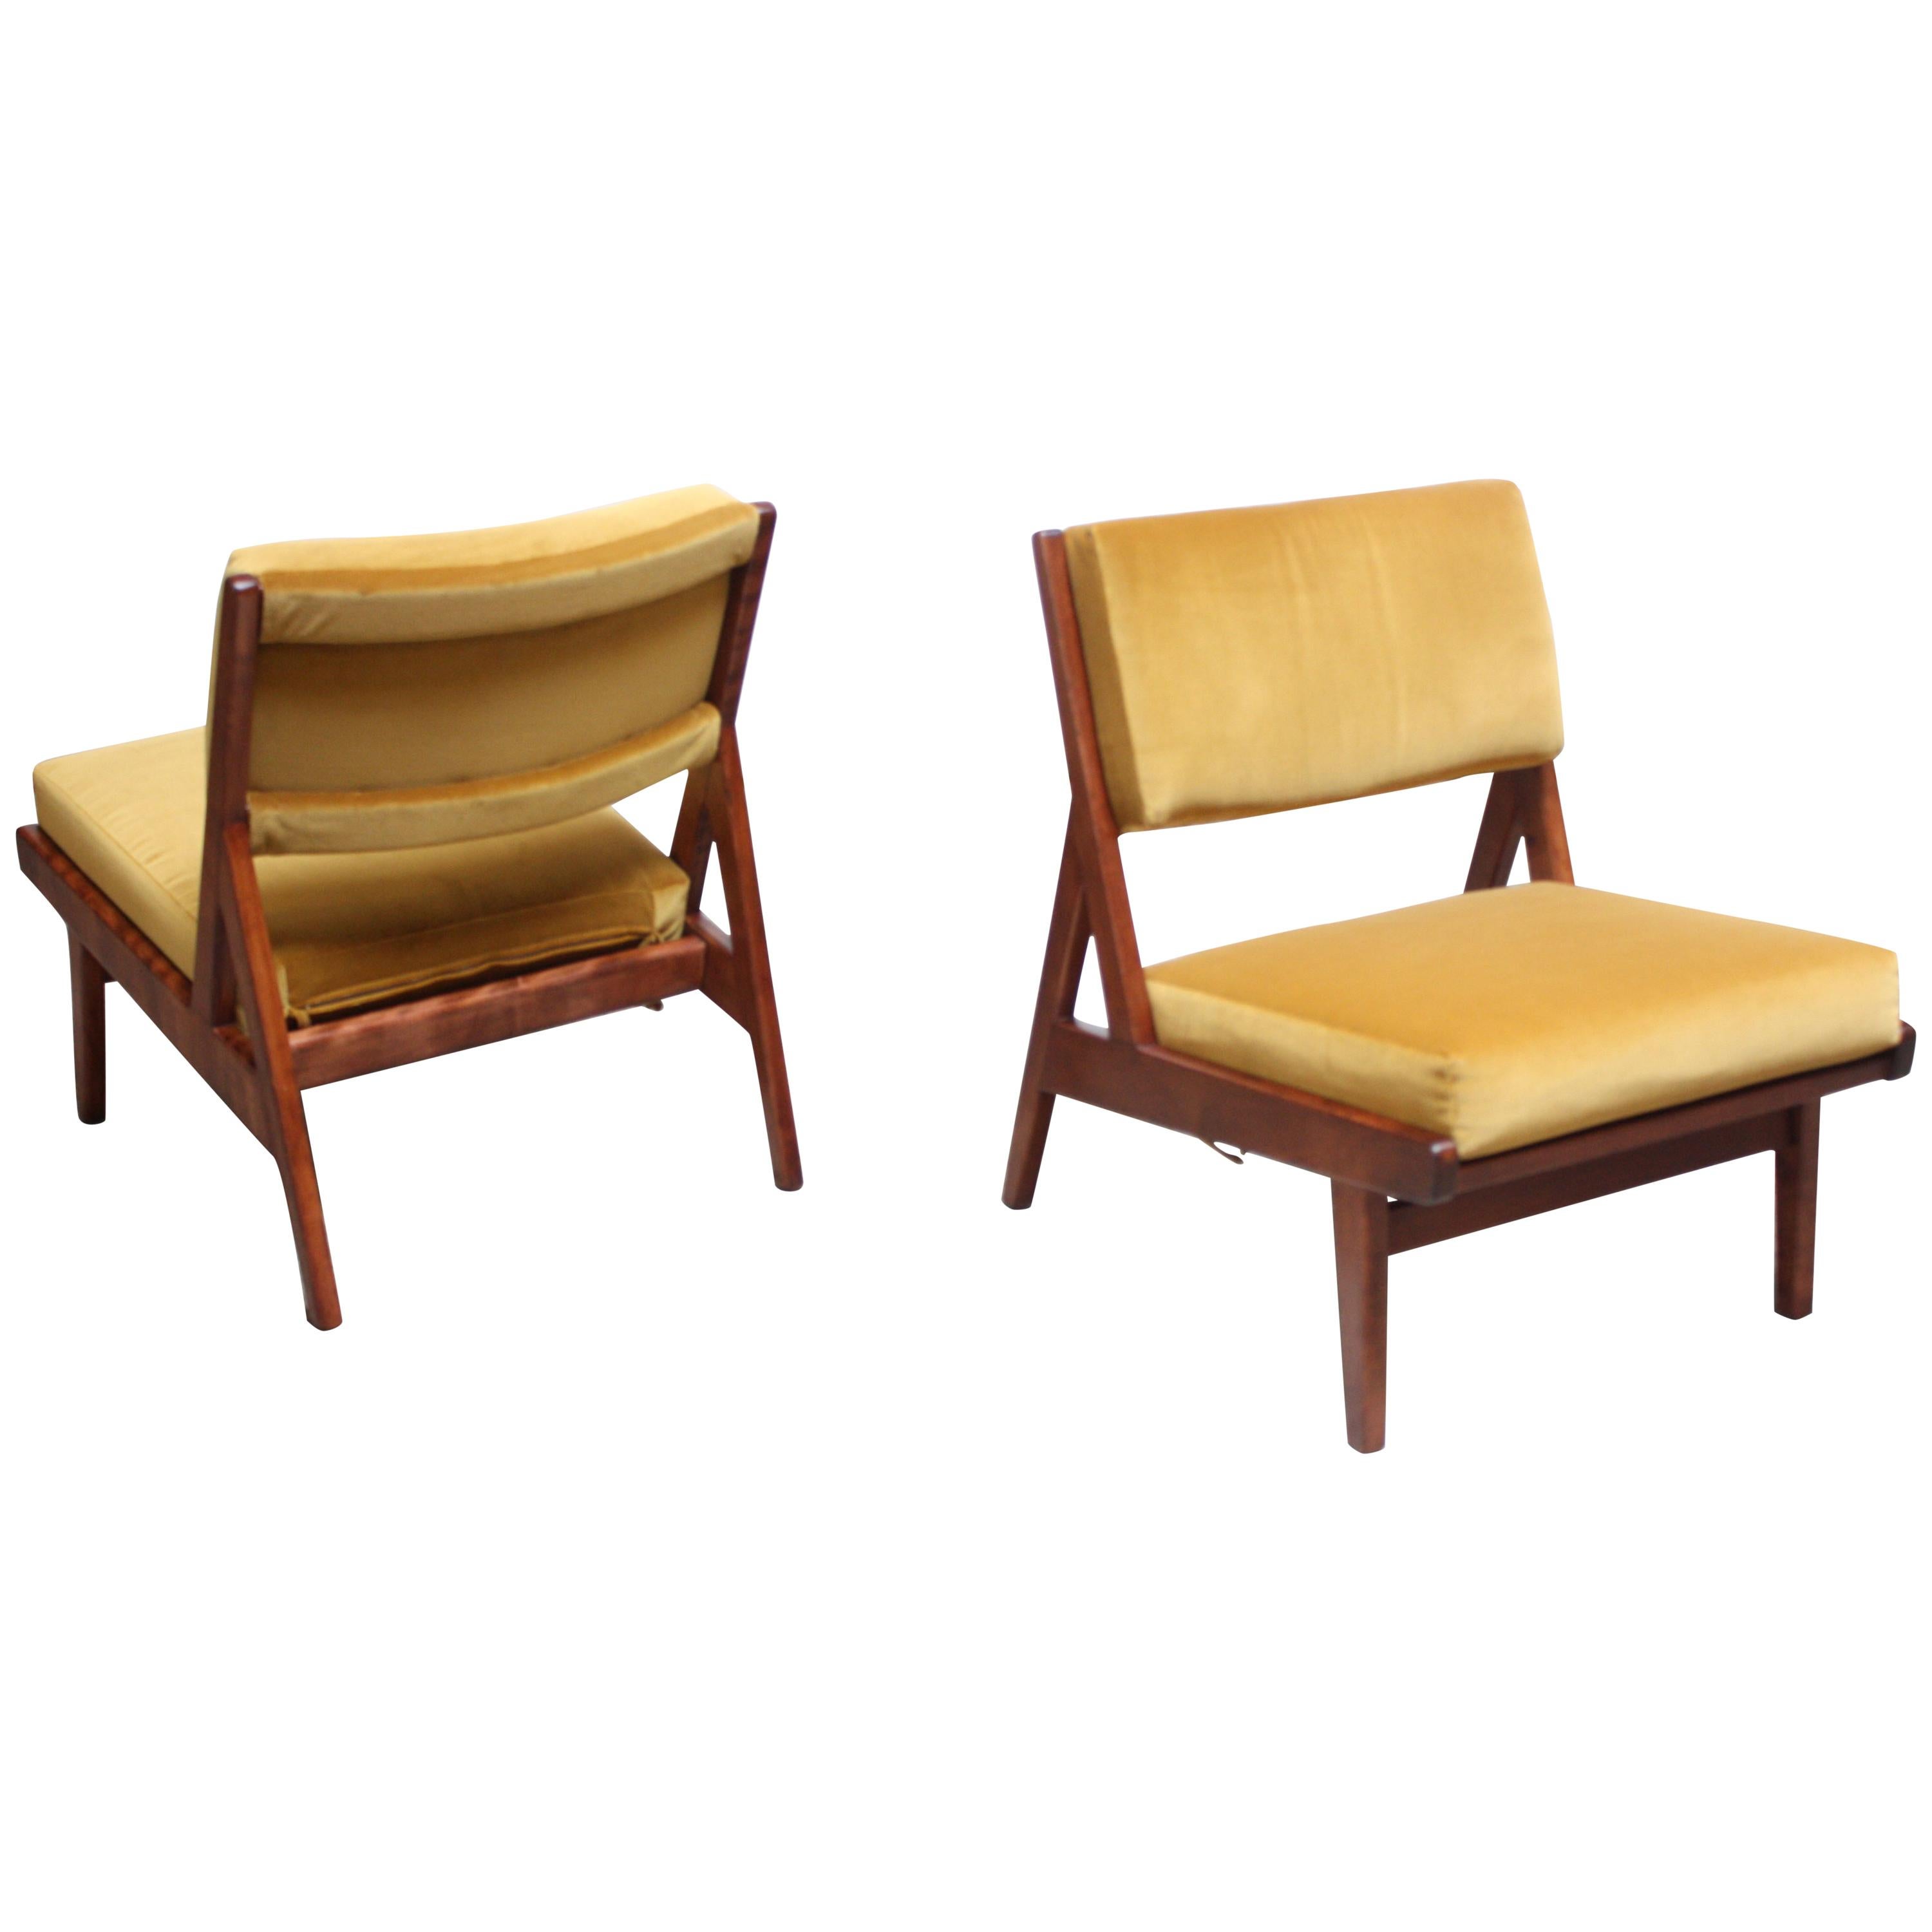 Pair of Jens Risom Low Lounge Chairs Model U-431 in Walnut and Velvet